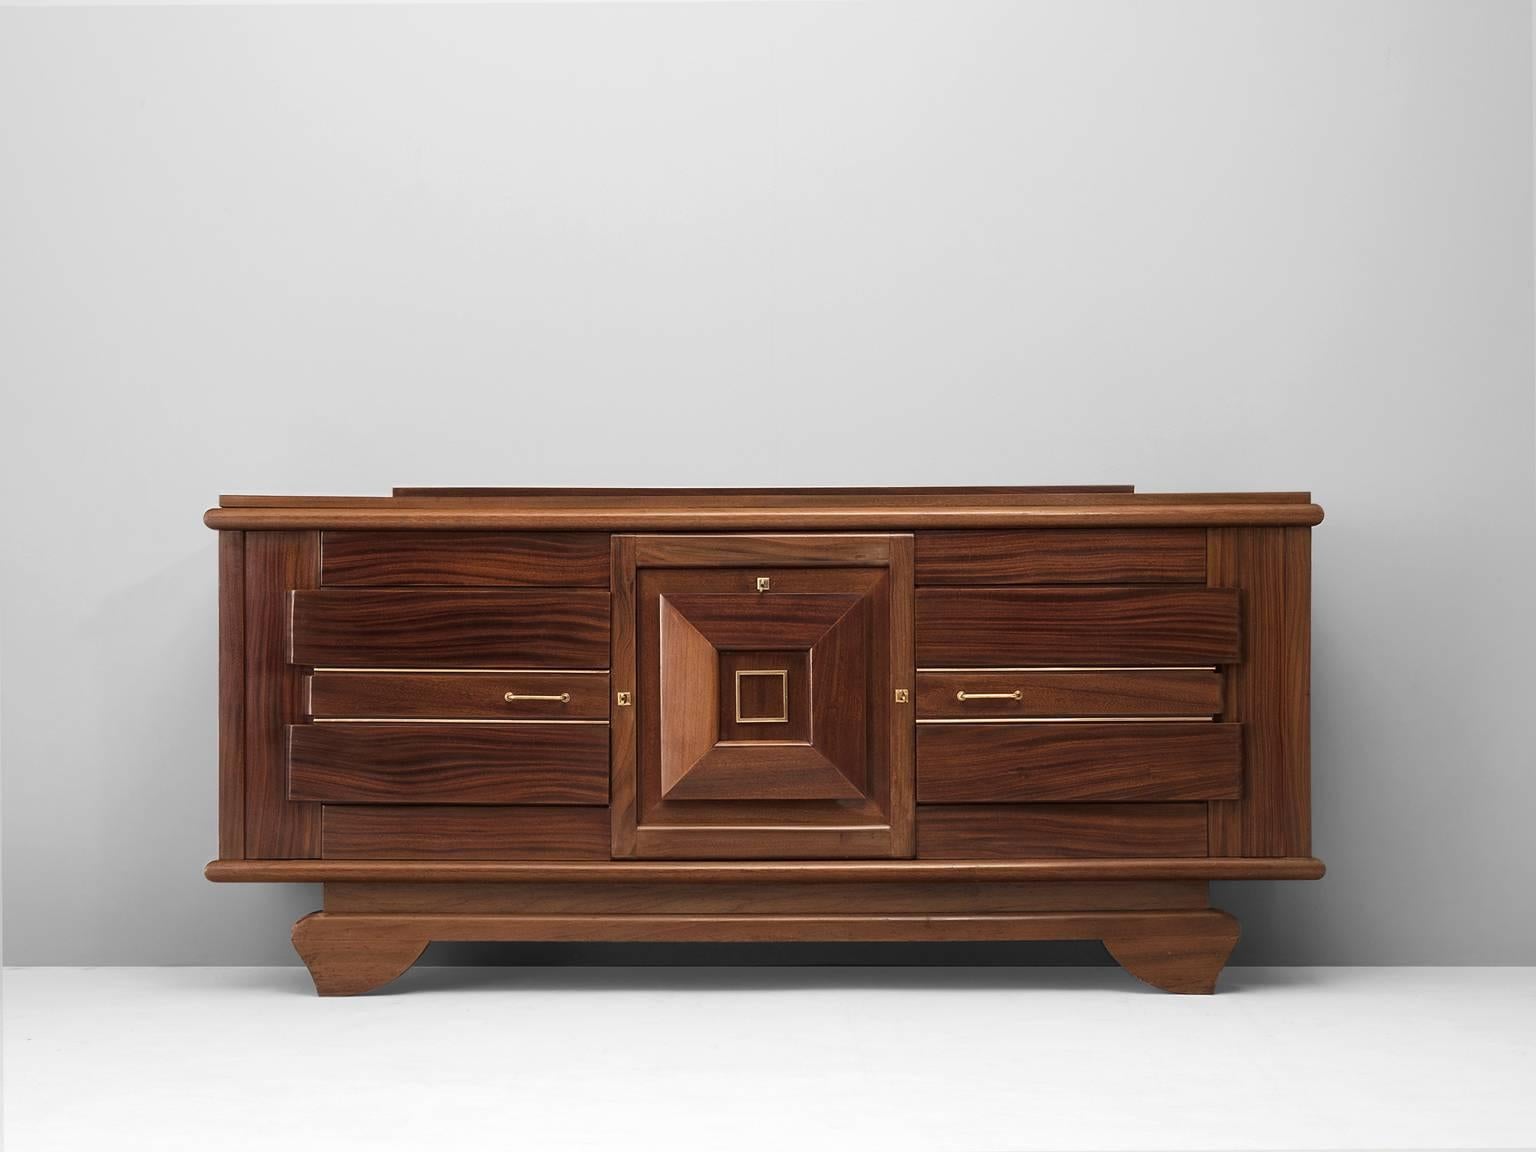 Credenza, in mahogany, France 1940s. 

Rare art Deco sideboards in solid mahogany and brass details. Well designed and crafted with beautiful details. Parquet top from mahogany veneer. Three doors, inside of shelves with decorated trim. Although